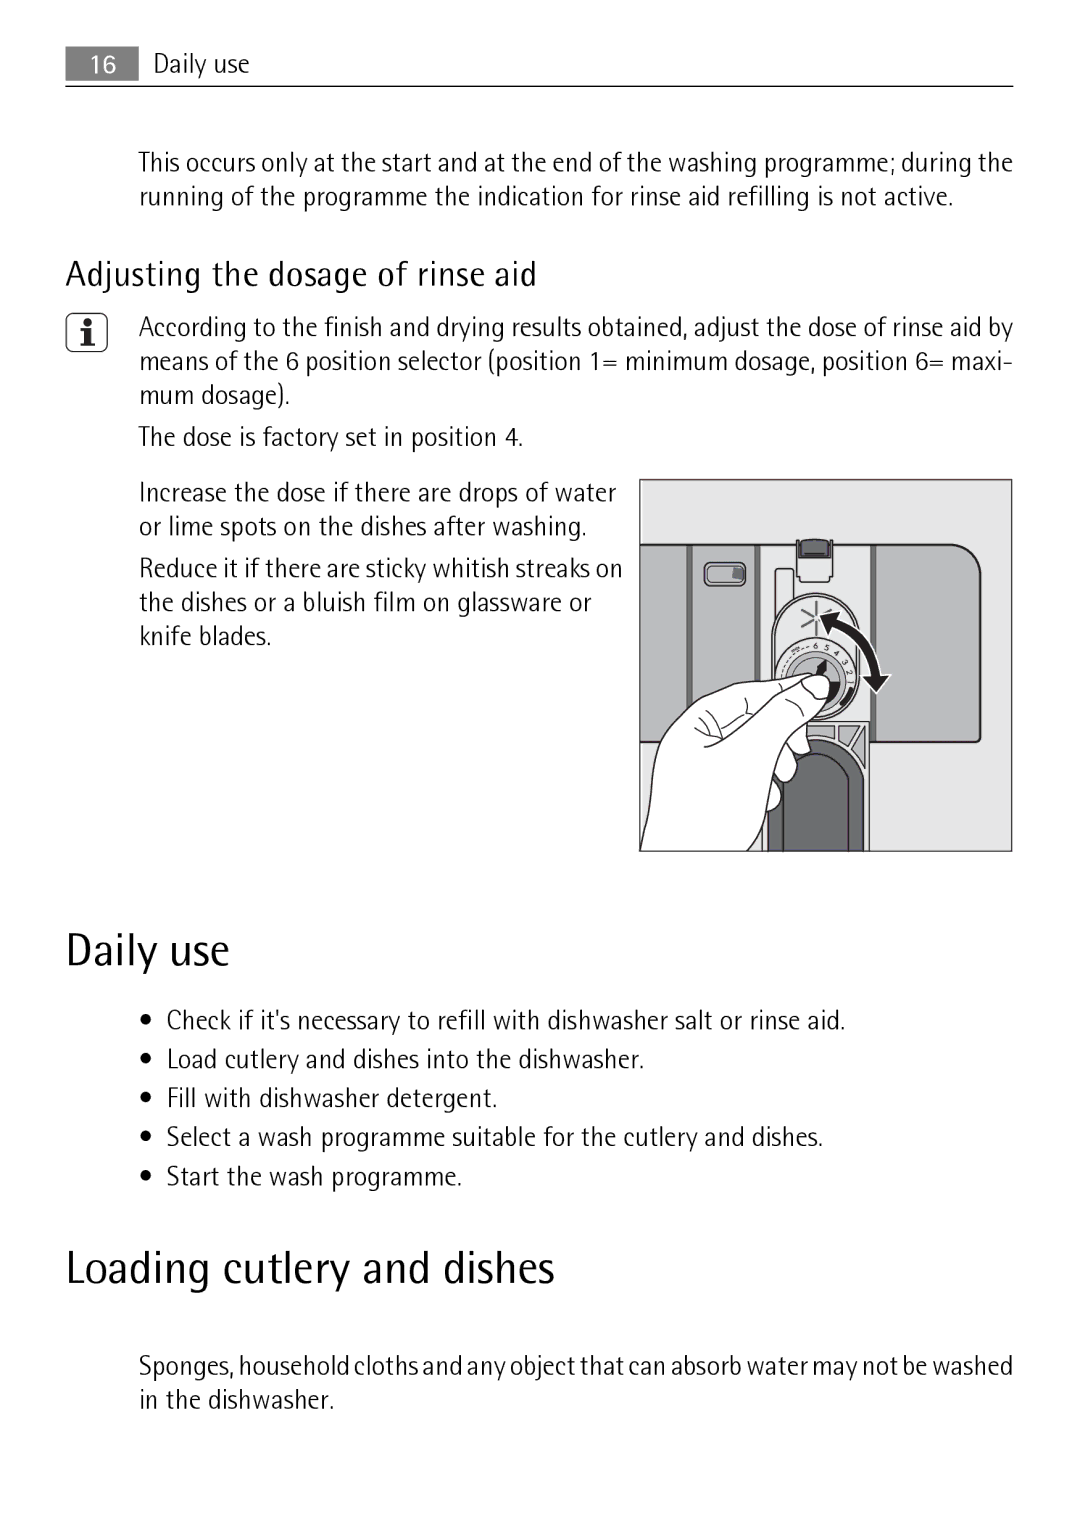 Electrolux FAVORIT 88010 user manual Daily use, Loading cutlery and dishes, Adjusting the dosage of rinse aid 